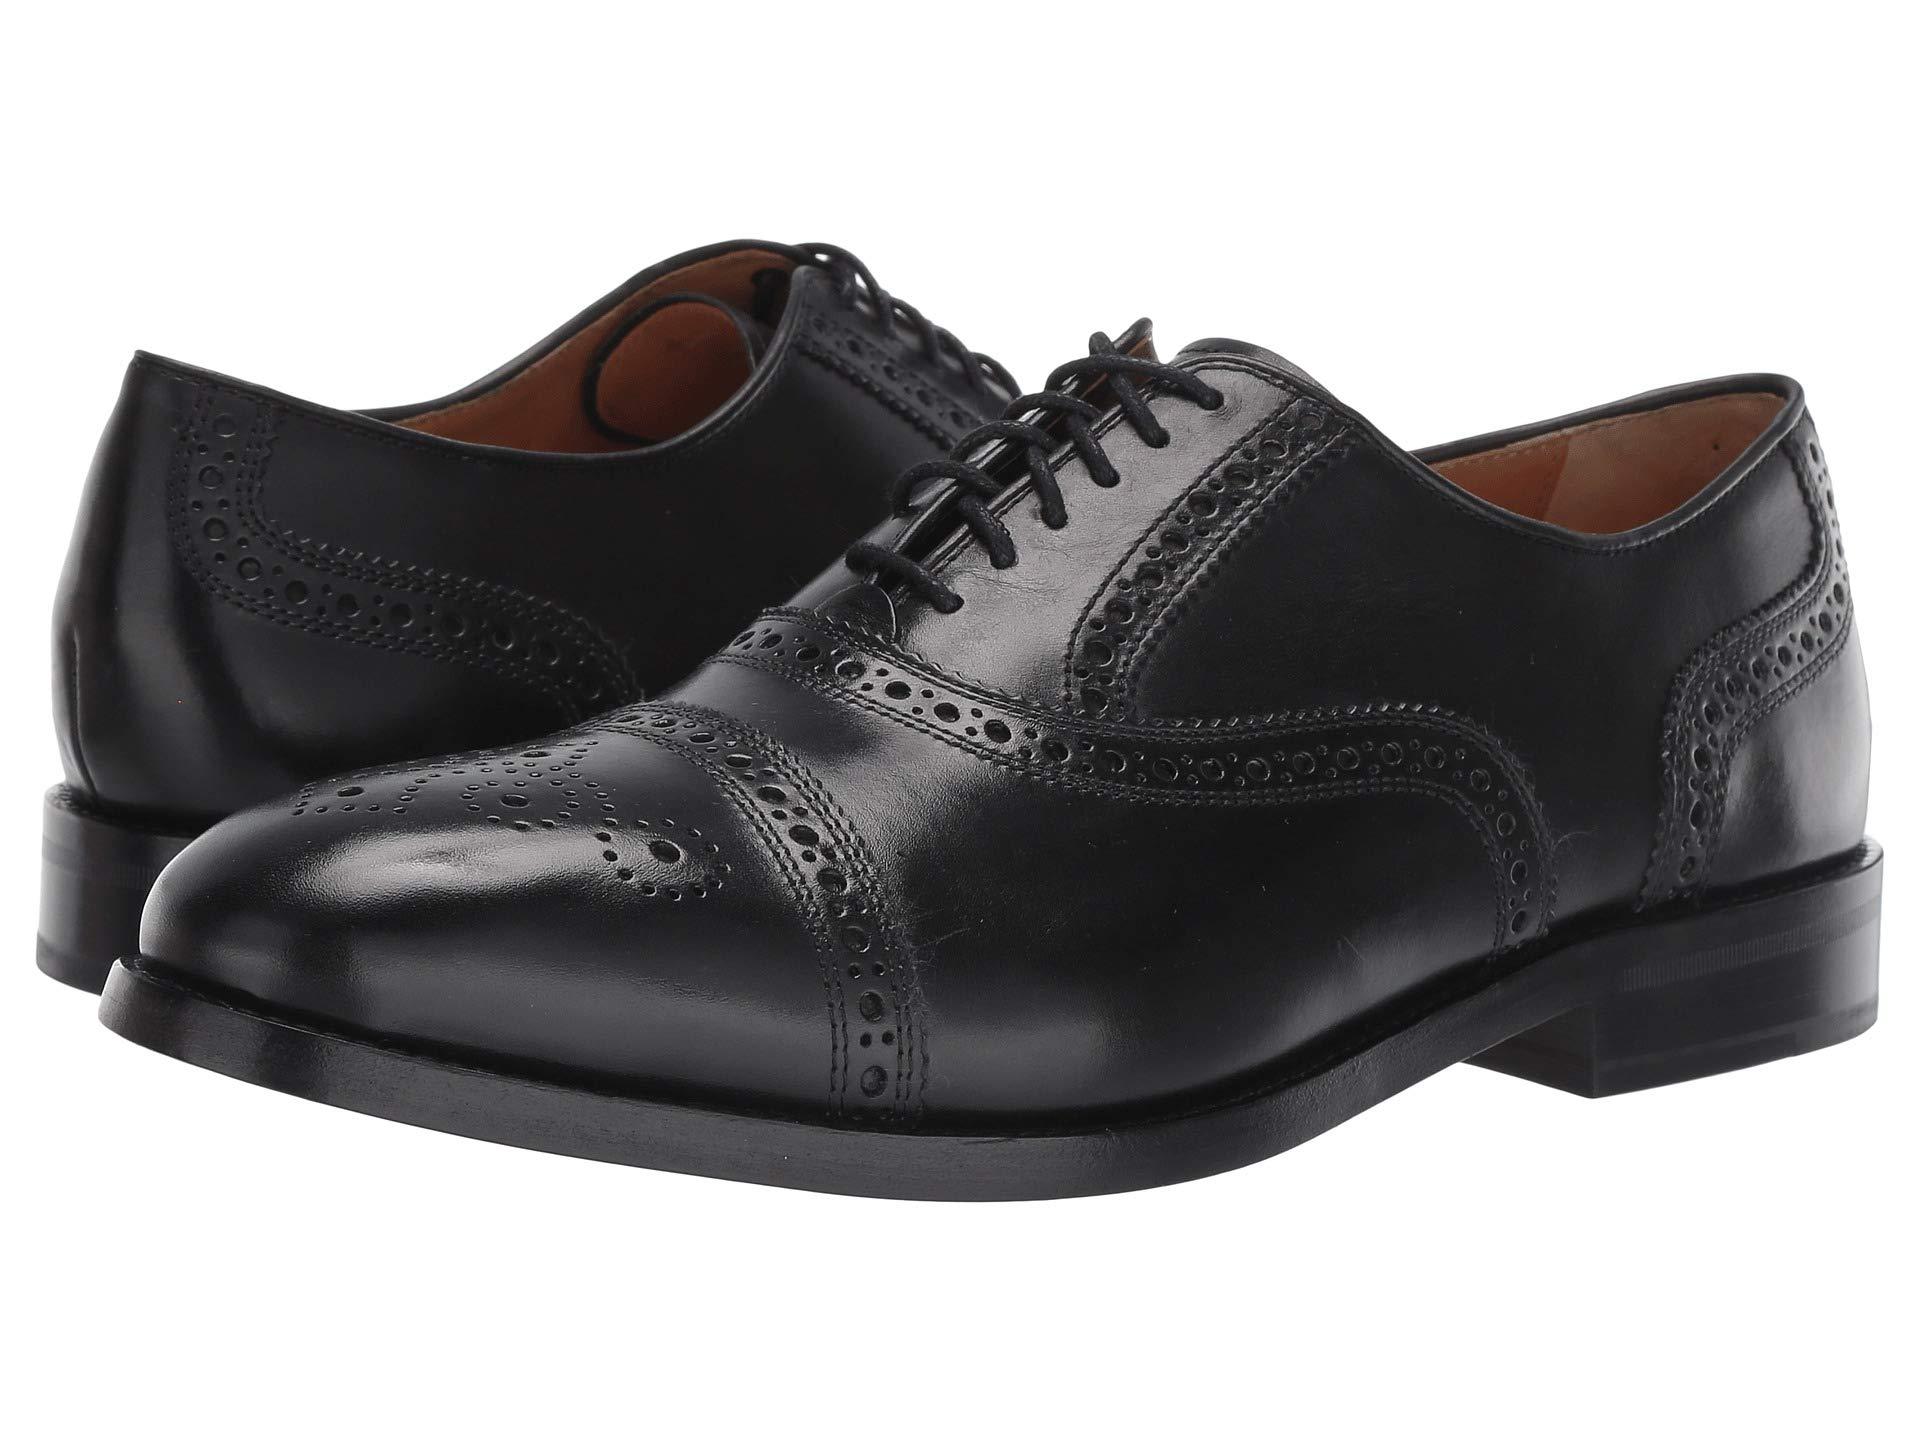 Cole Haan Leather Kneeland Brogue Cap Toe Oxford in Black for Men - Lyst